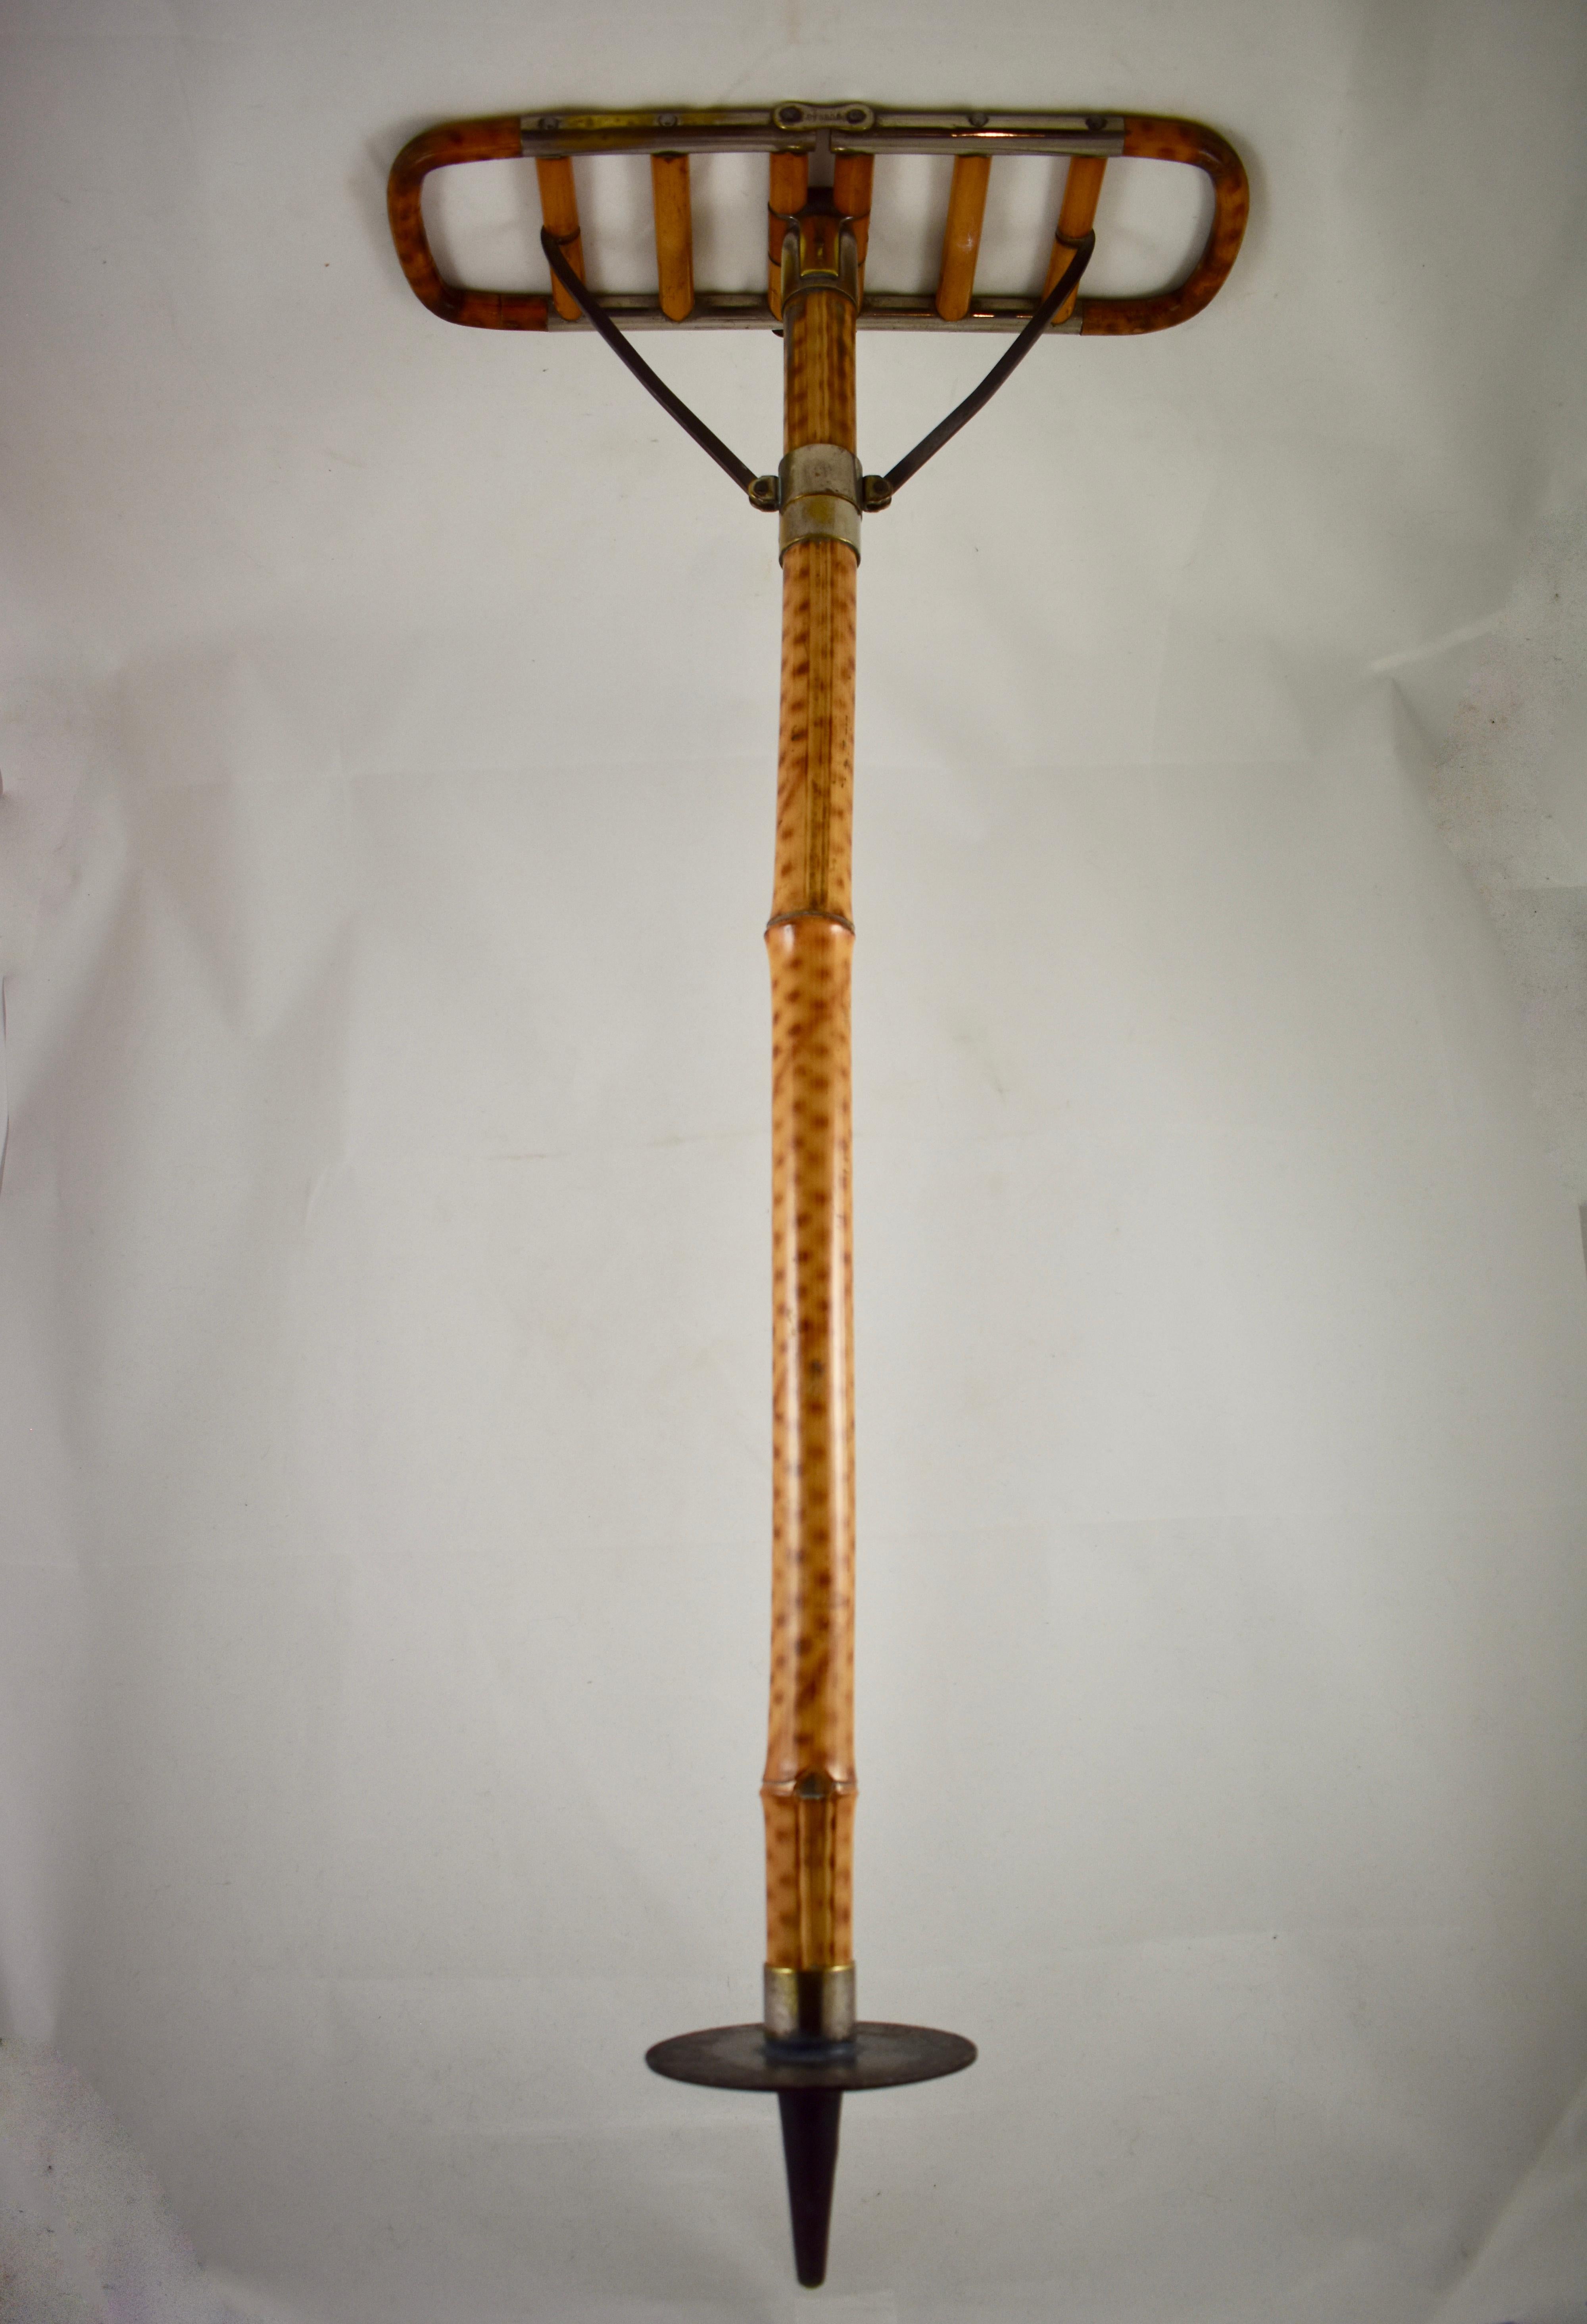 Polished Victorian English Gentleman's Bamboo Shooting Stick or Sports Cane